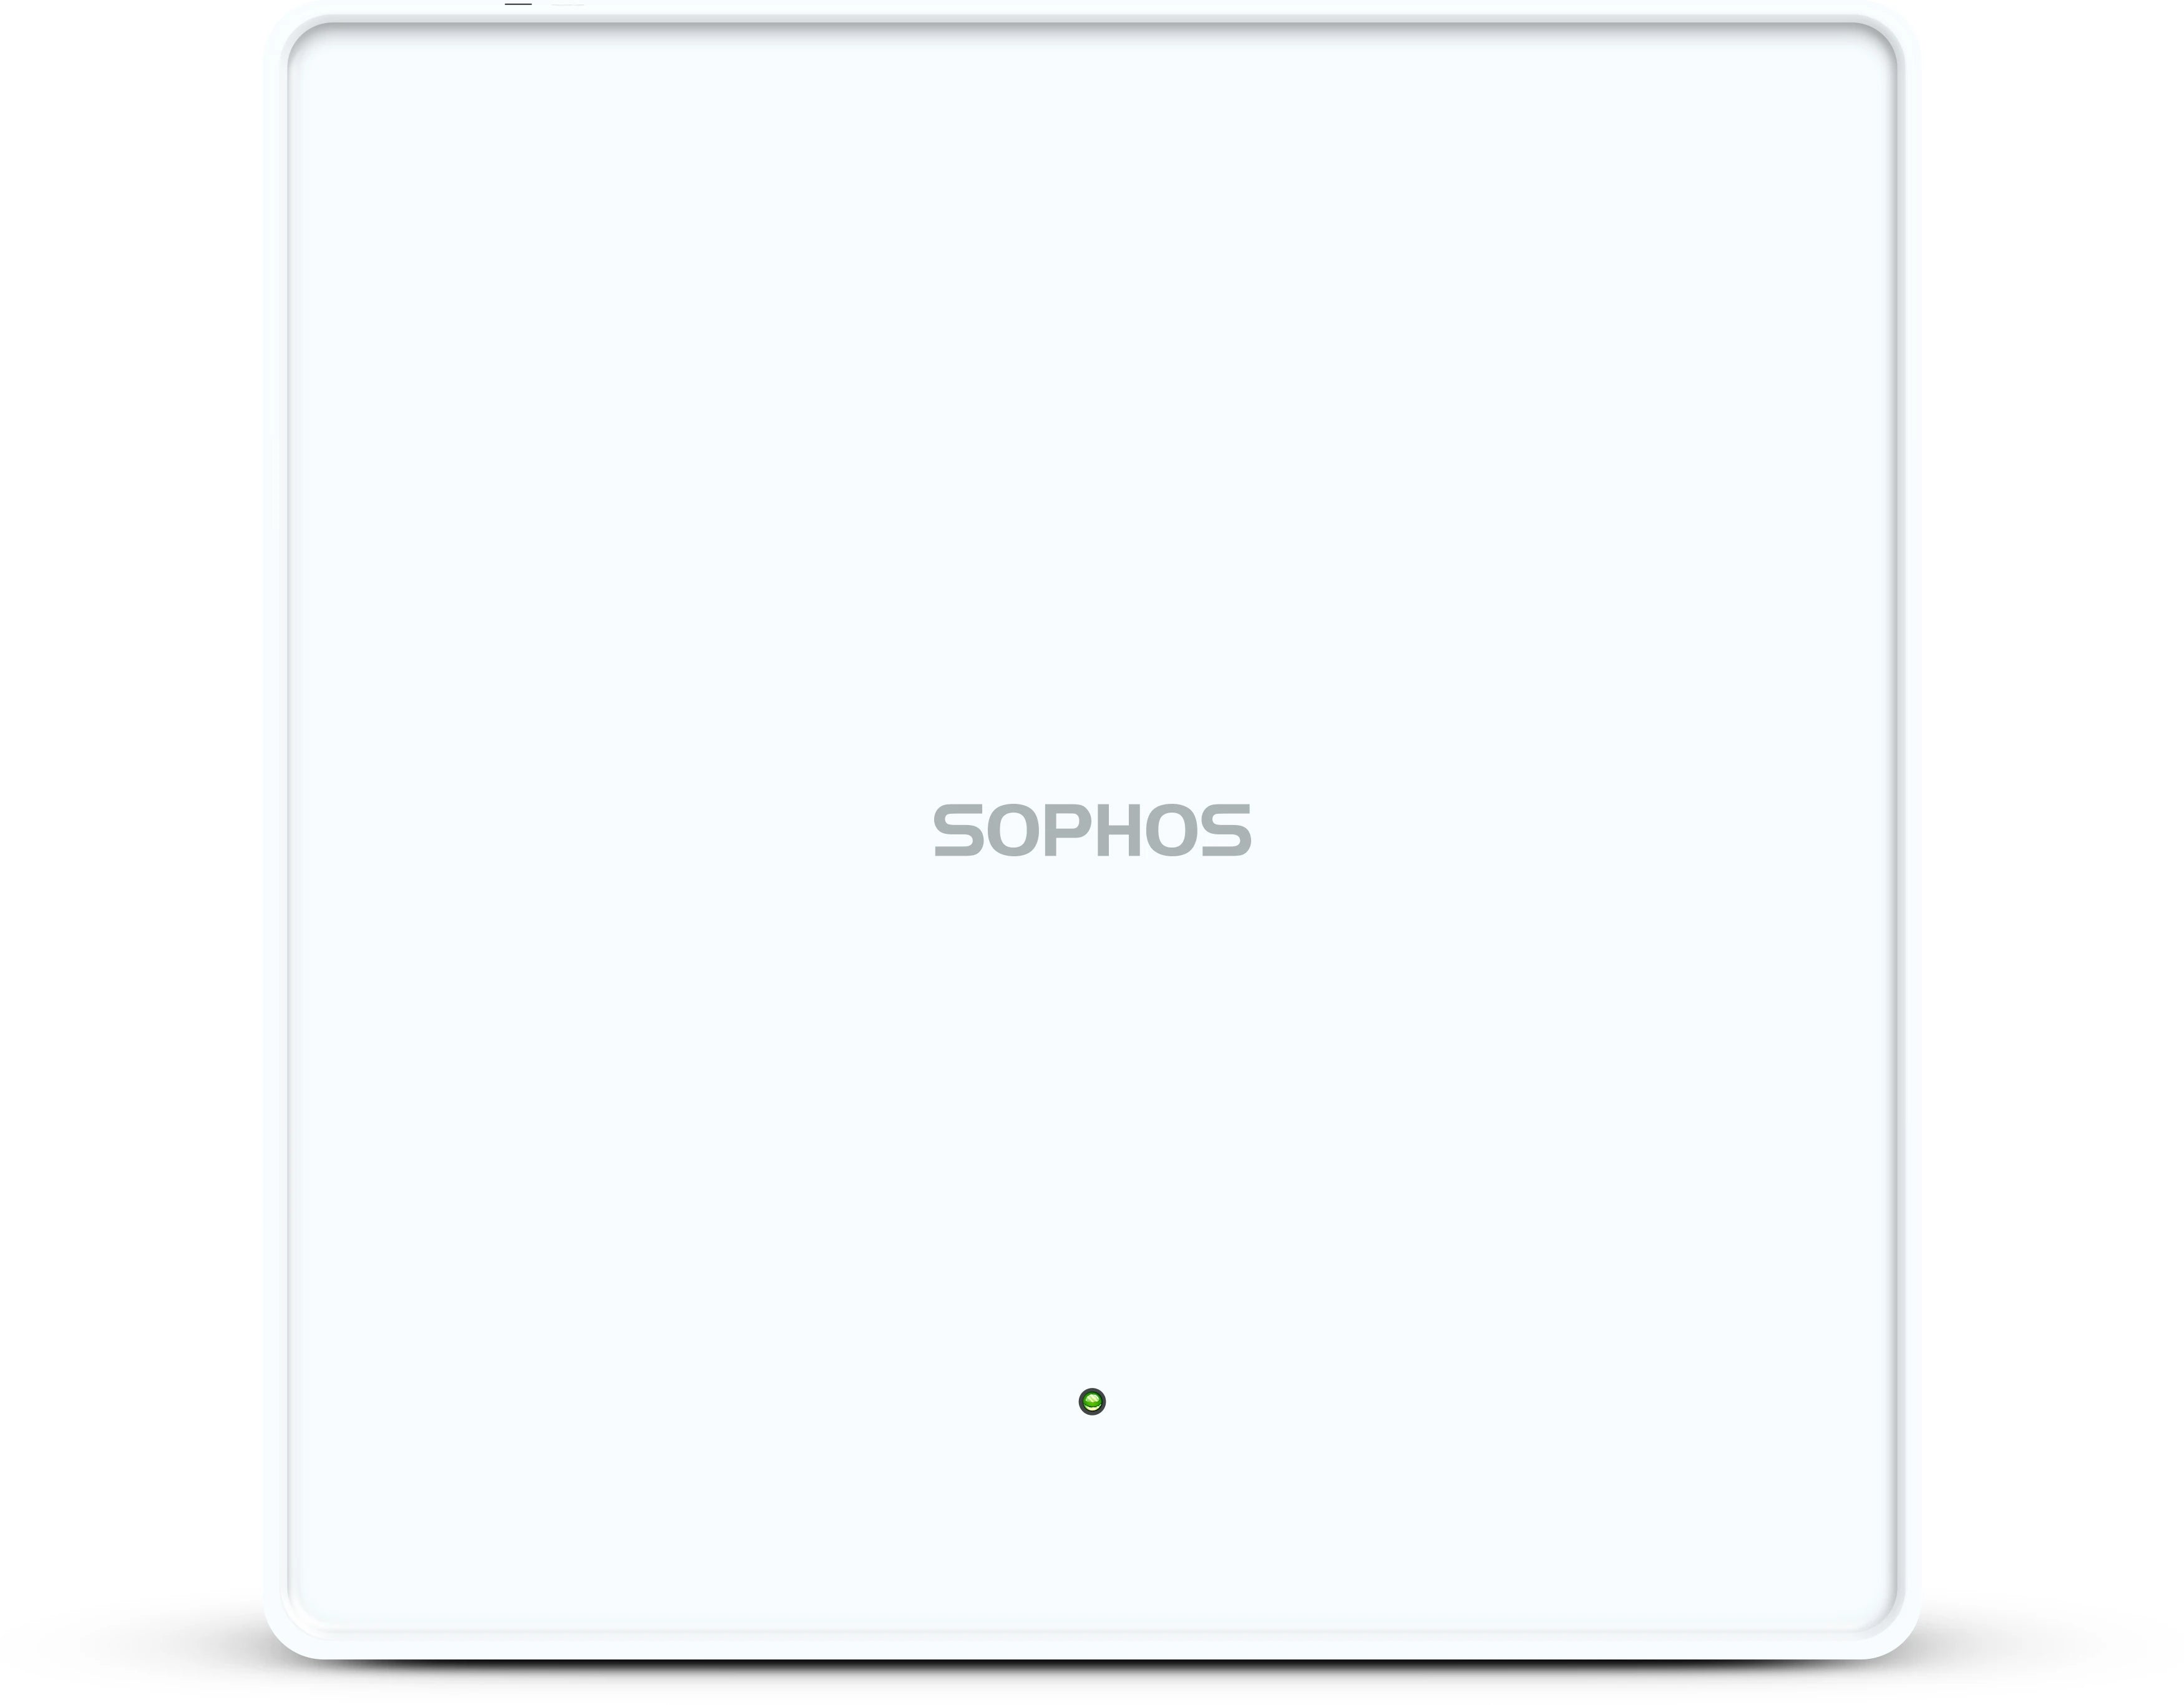 Sophos AP6 840E plenum-rated Access Point (EUK) plain, no power adapter/PoE Injector